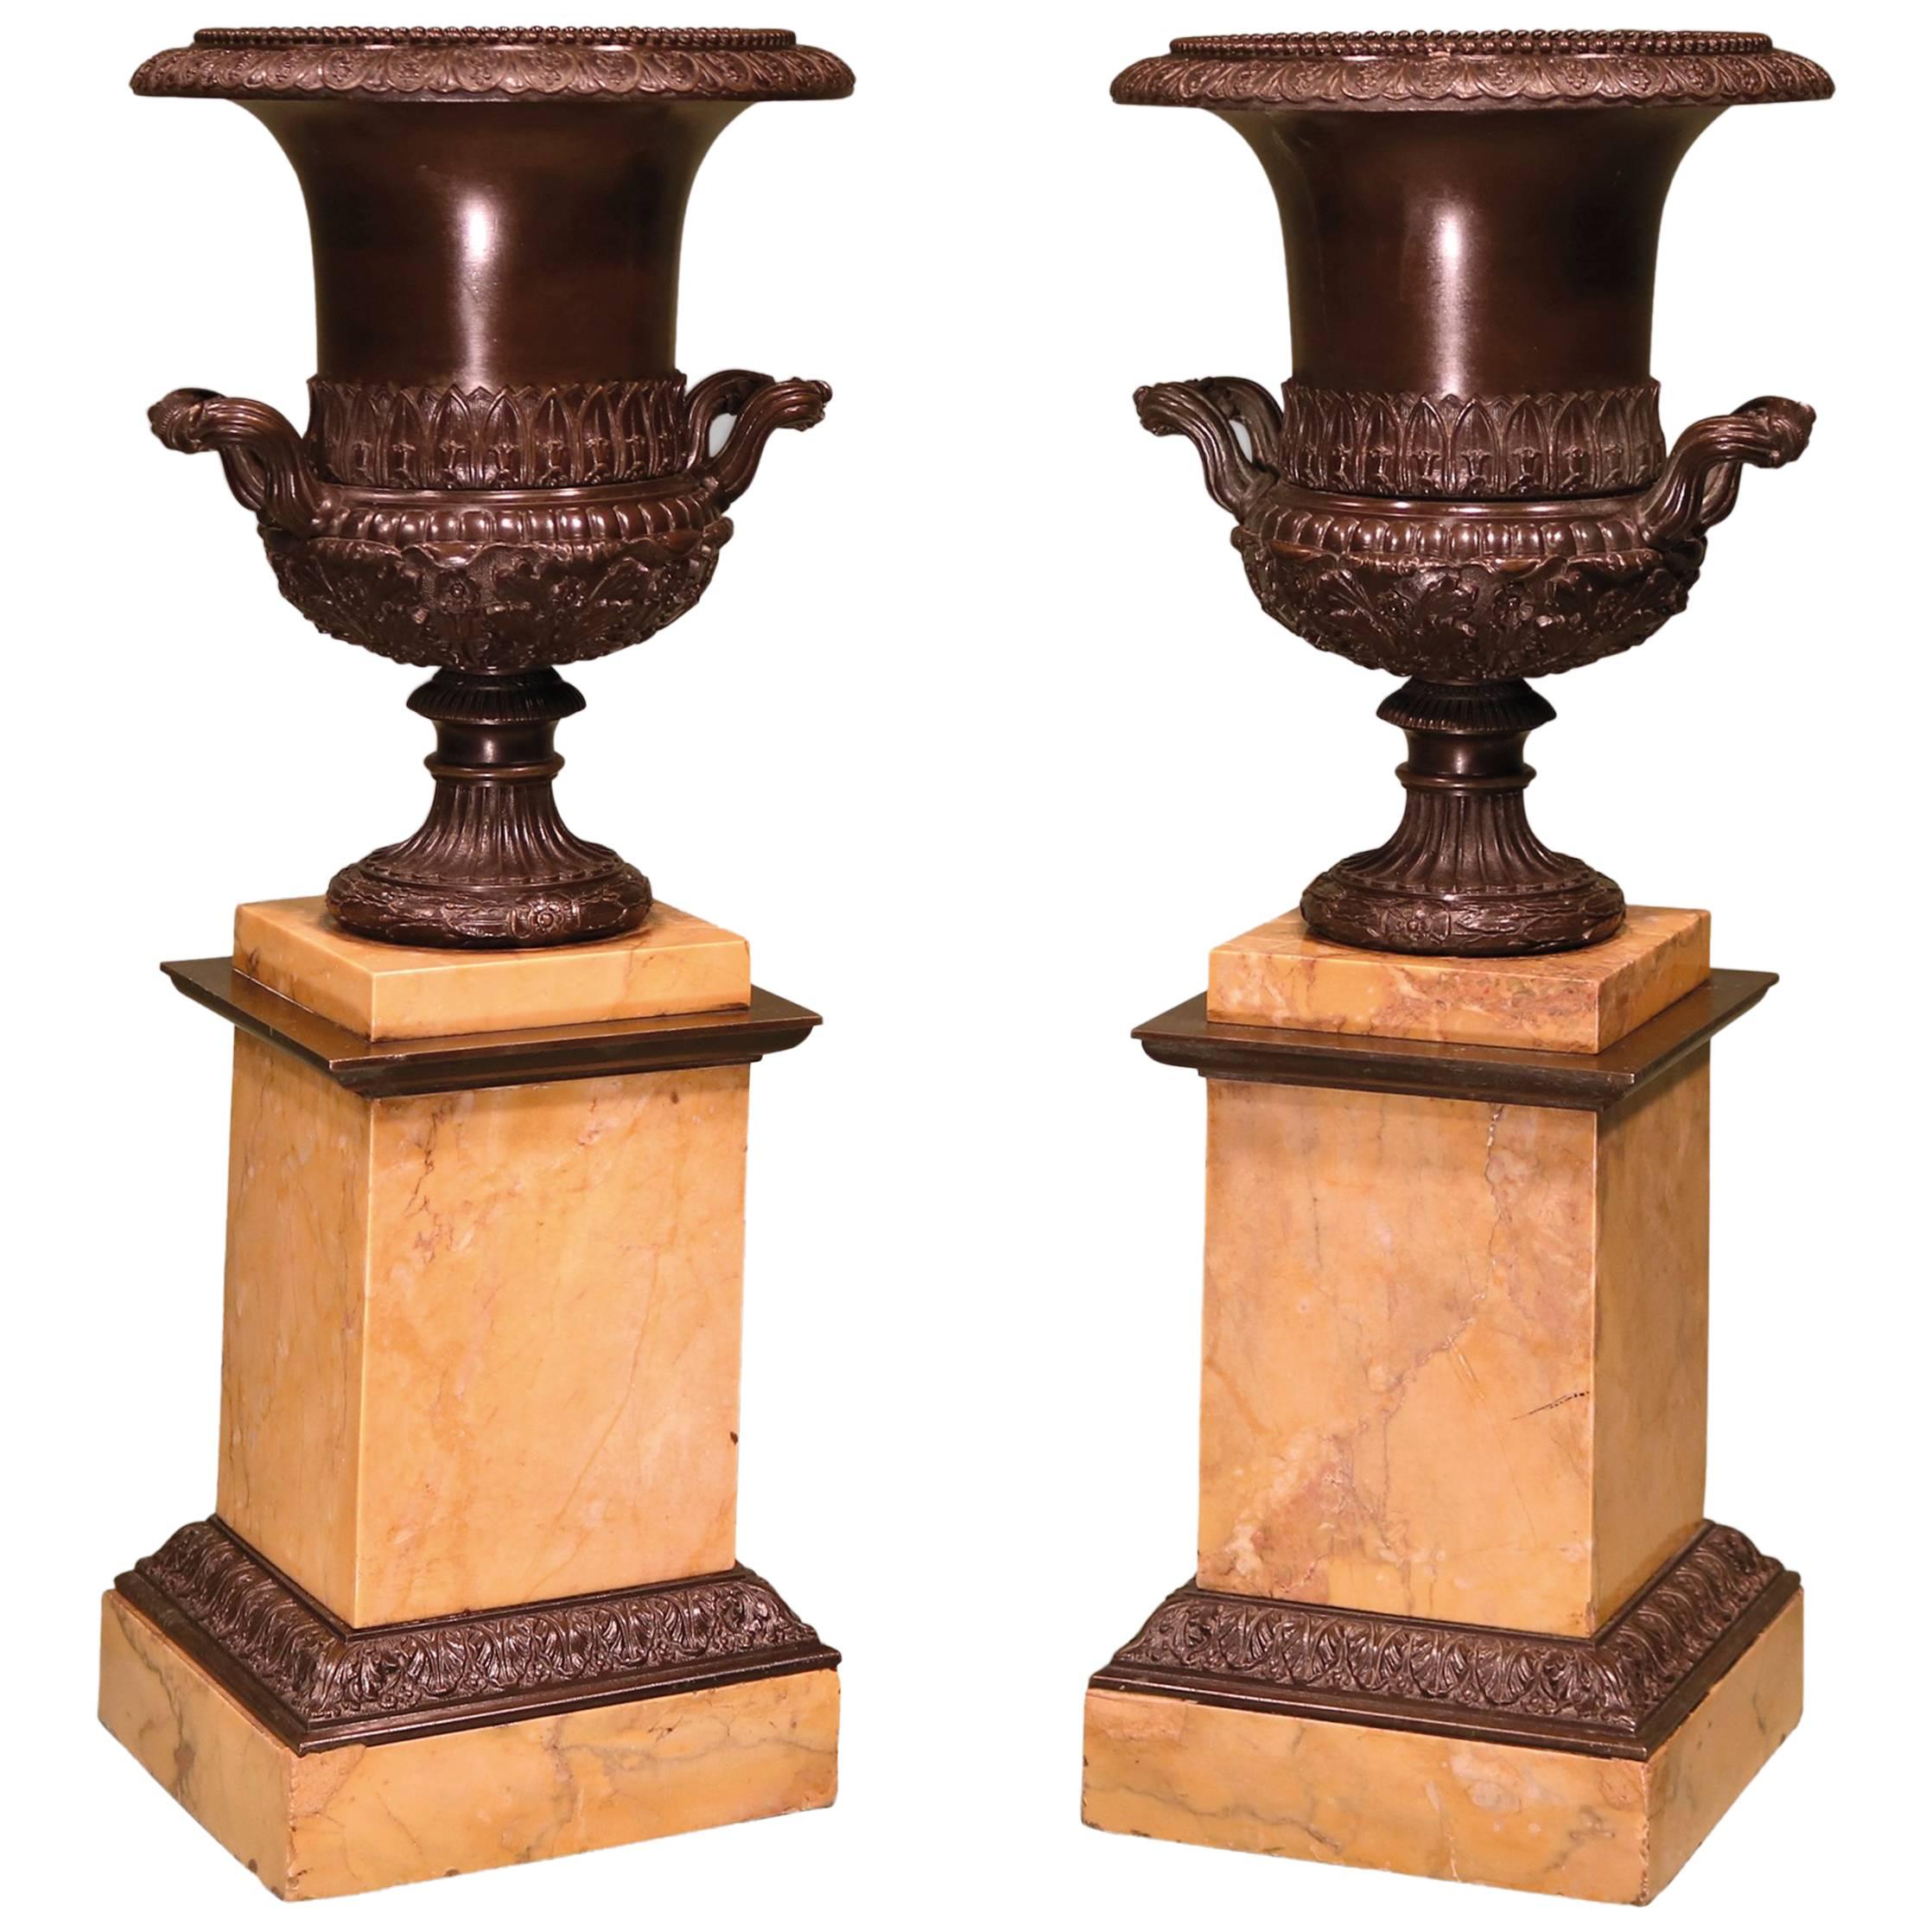 Early 19th century bronze campana-shaped urns For Sale